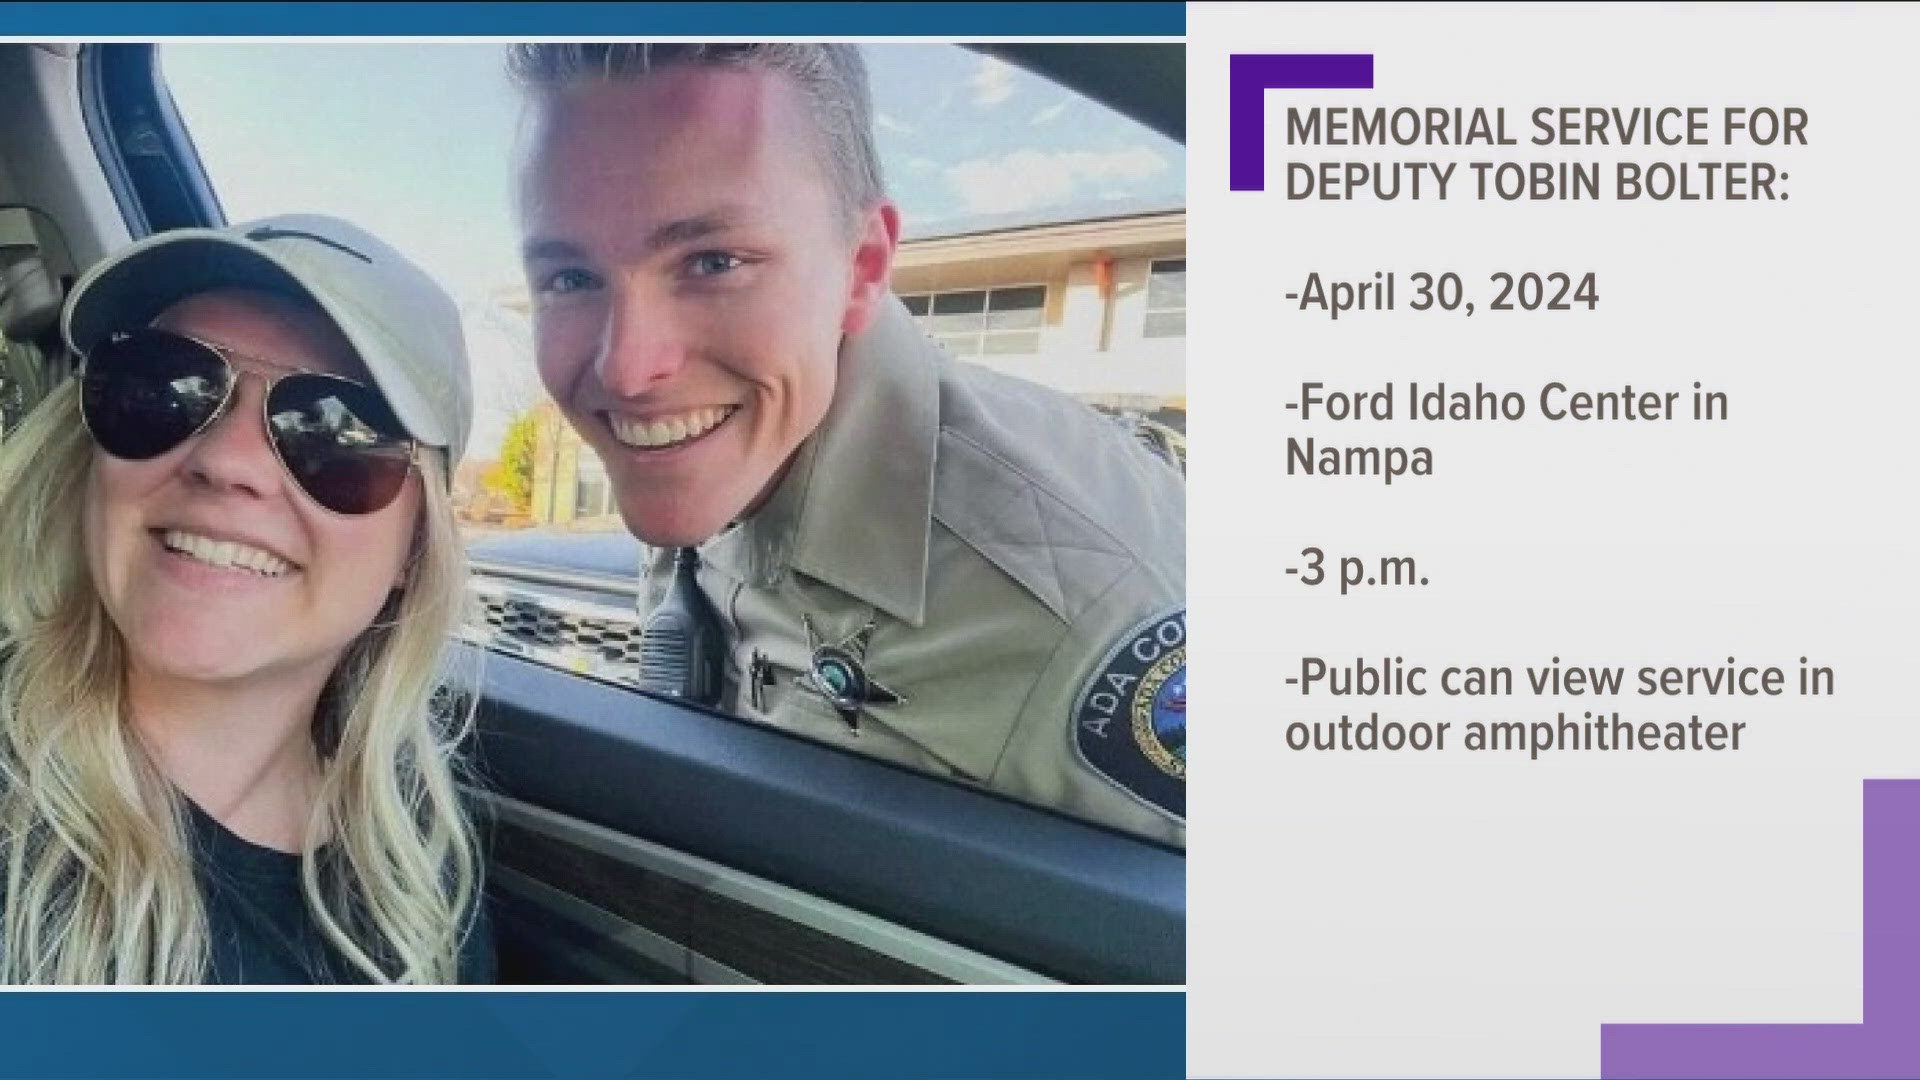 Deputy Tobin Bolter was shot and killed in the line of duty during a traffic stop in Boise. The procession is Tuesday.